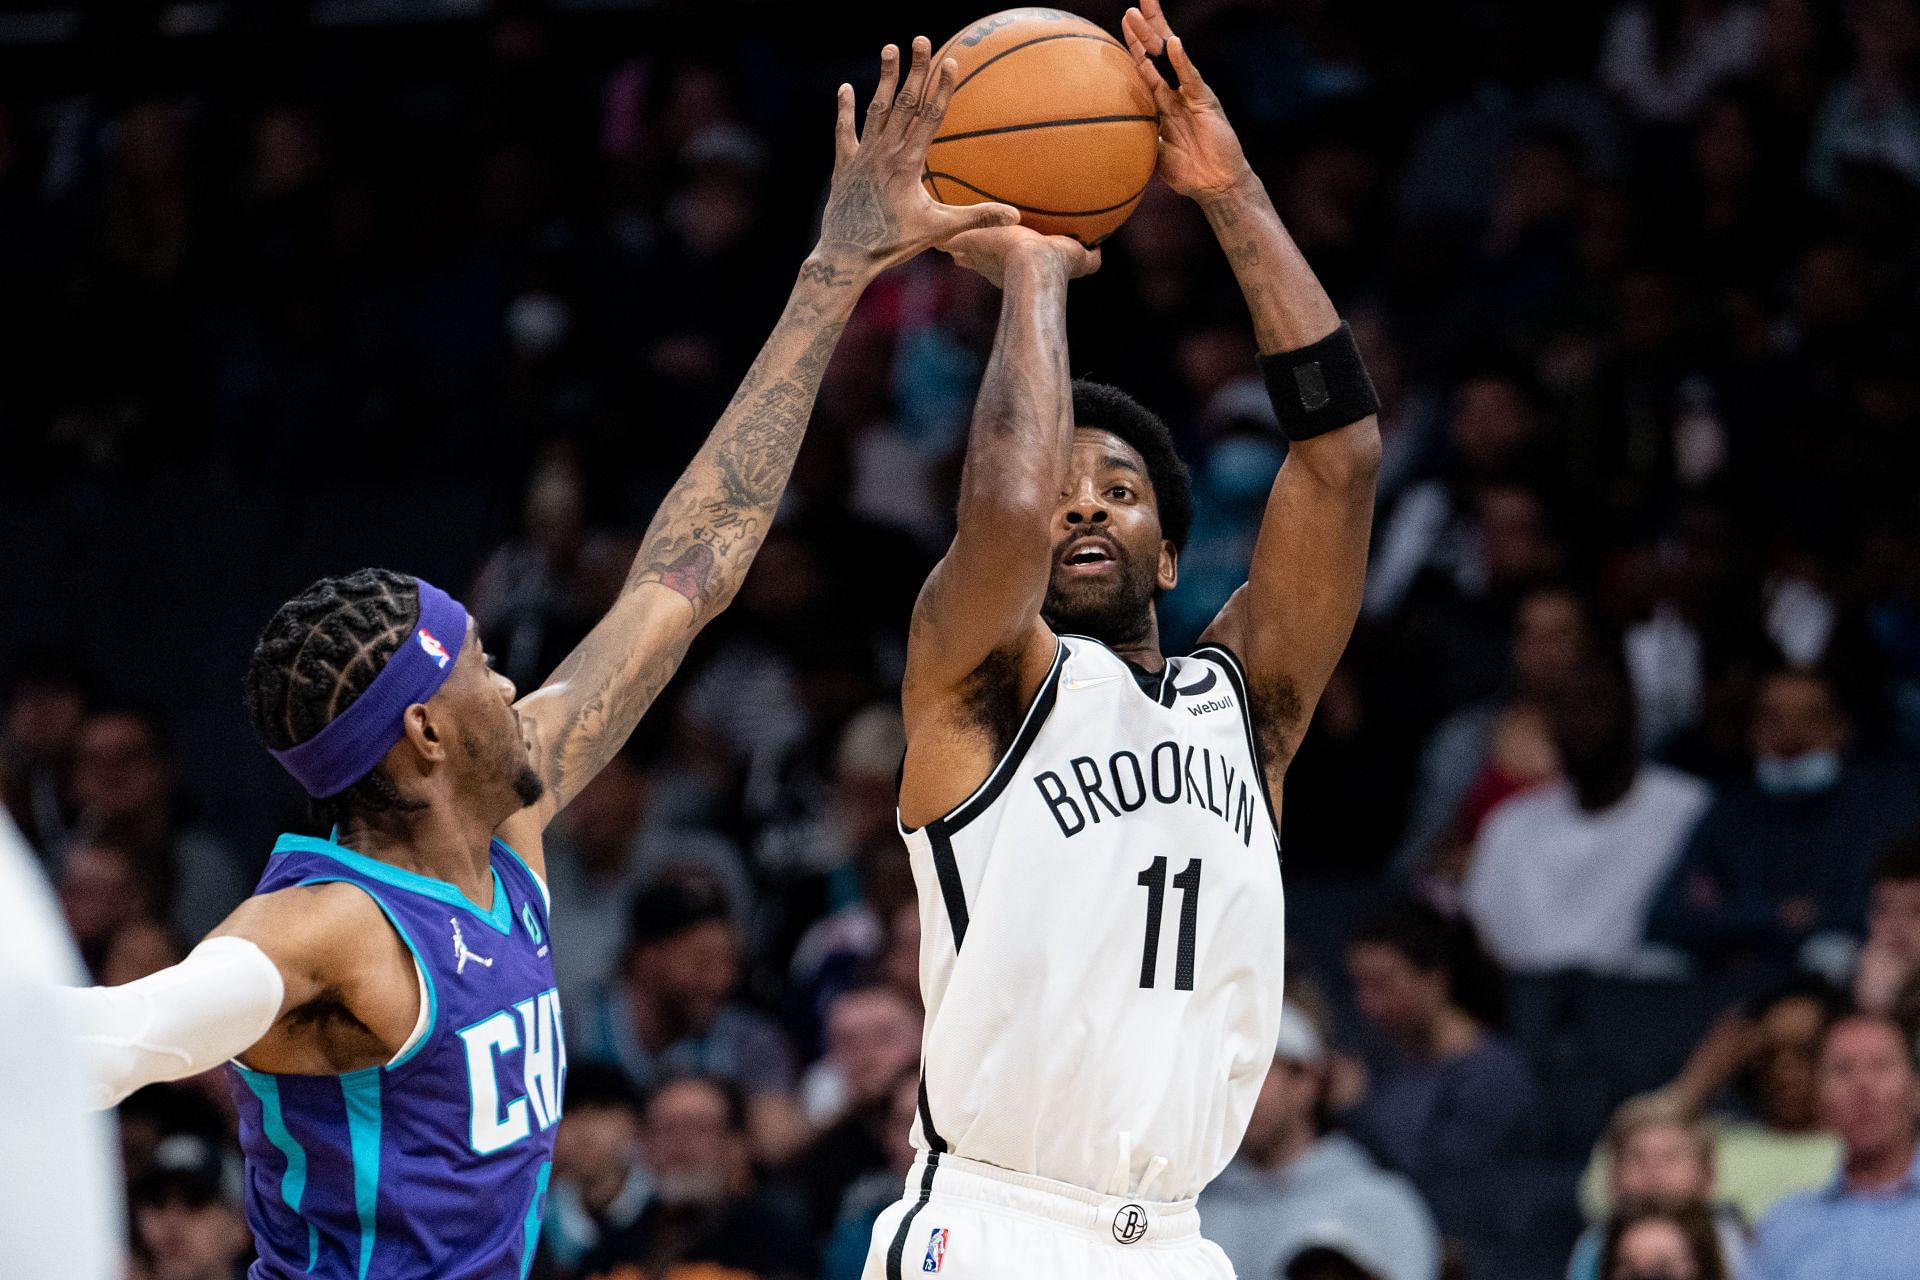 Kyrie Irving of the Brooklyn Nets shoots over Jalen McDaniels of the Charlotte Hornets